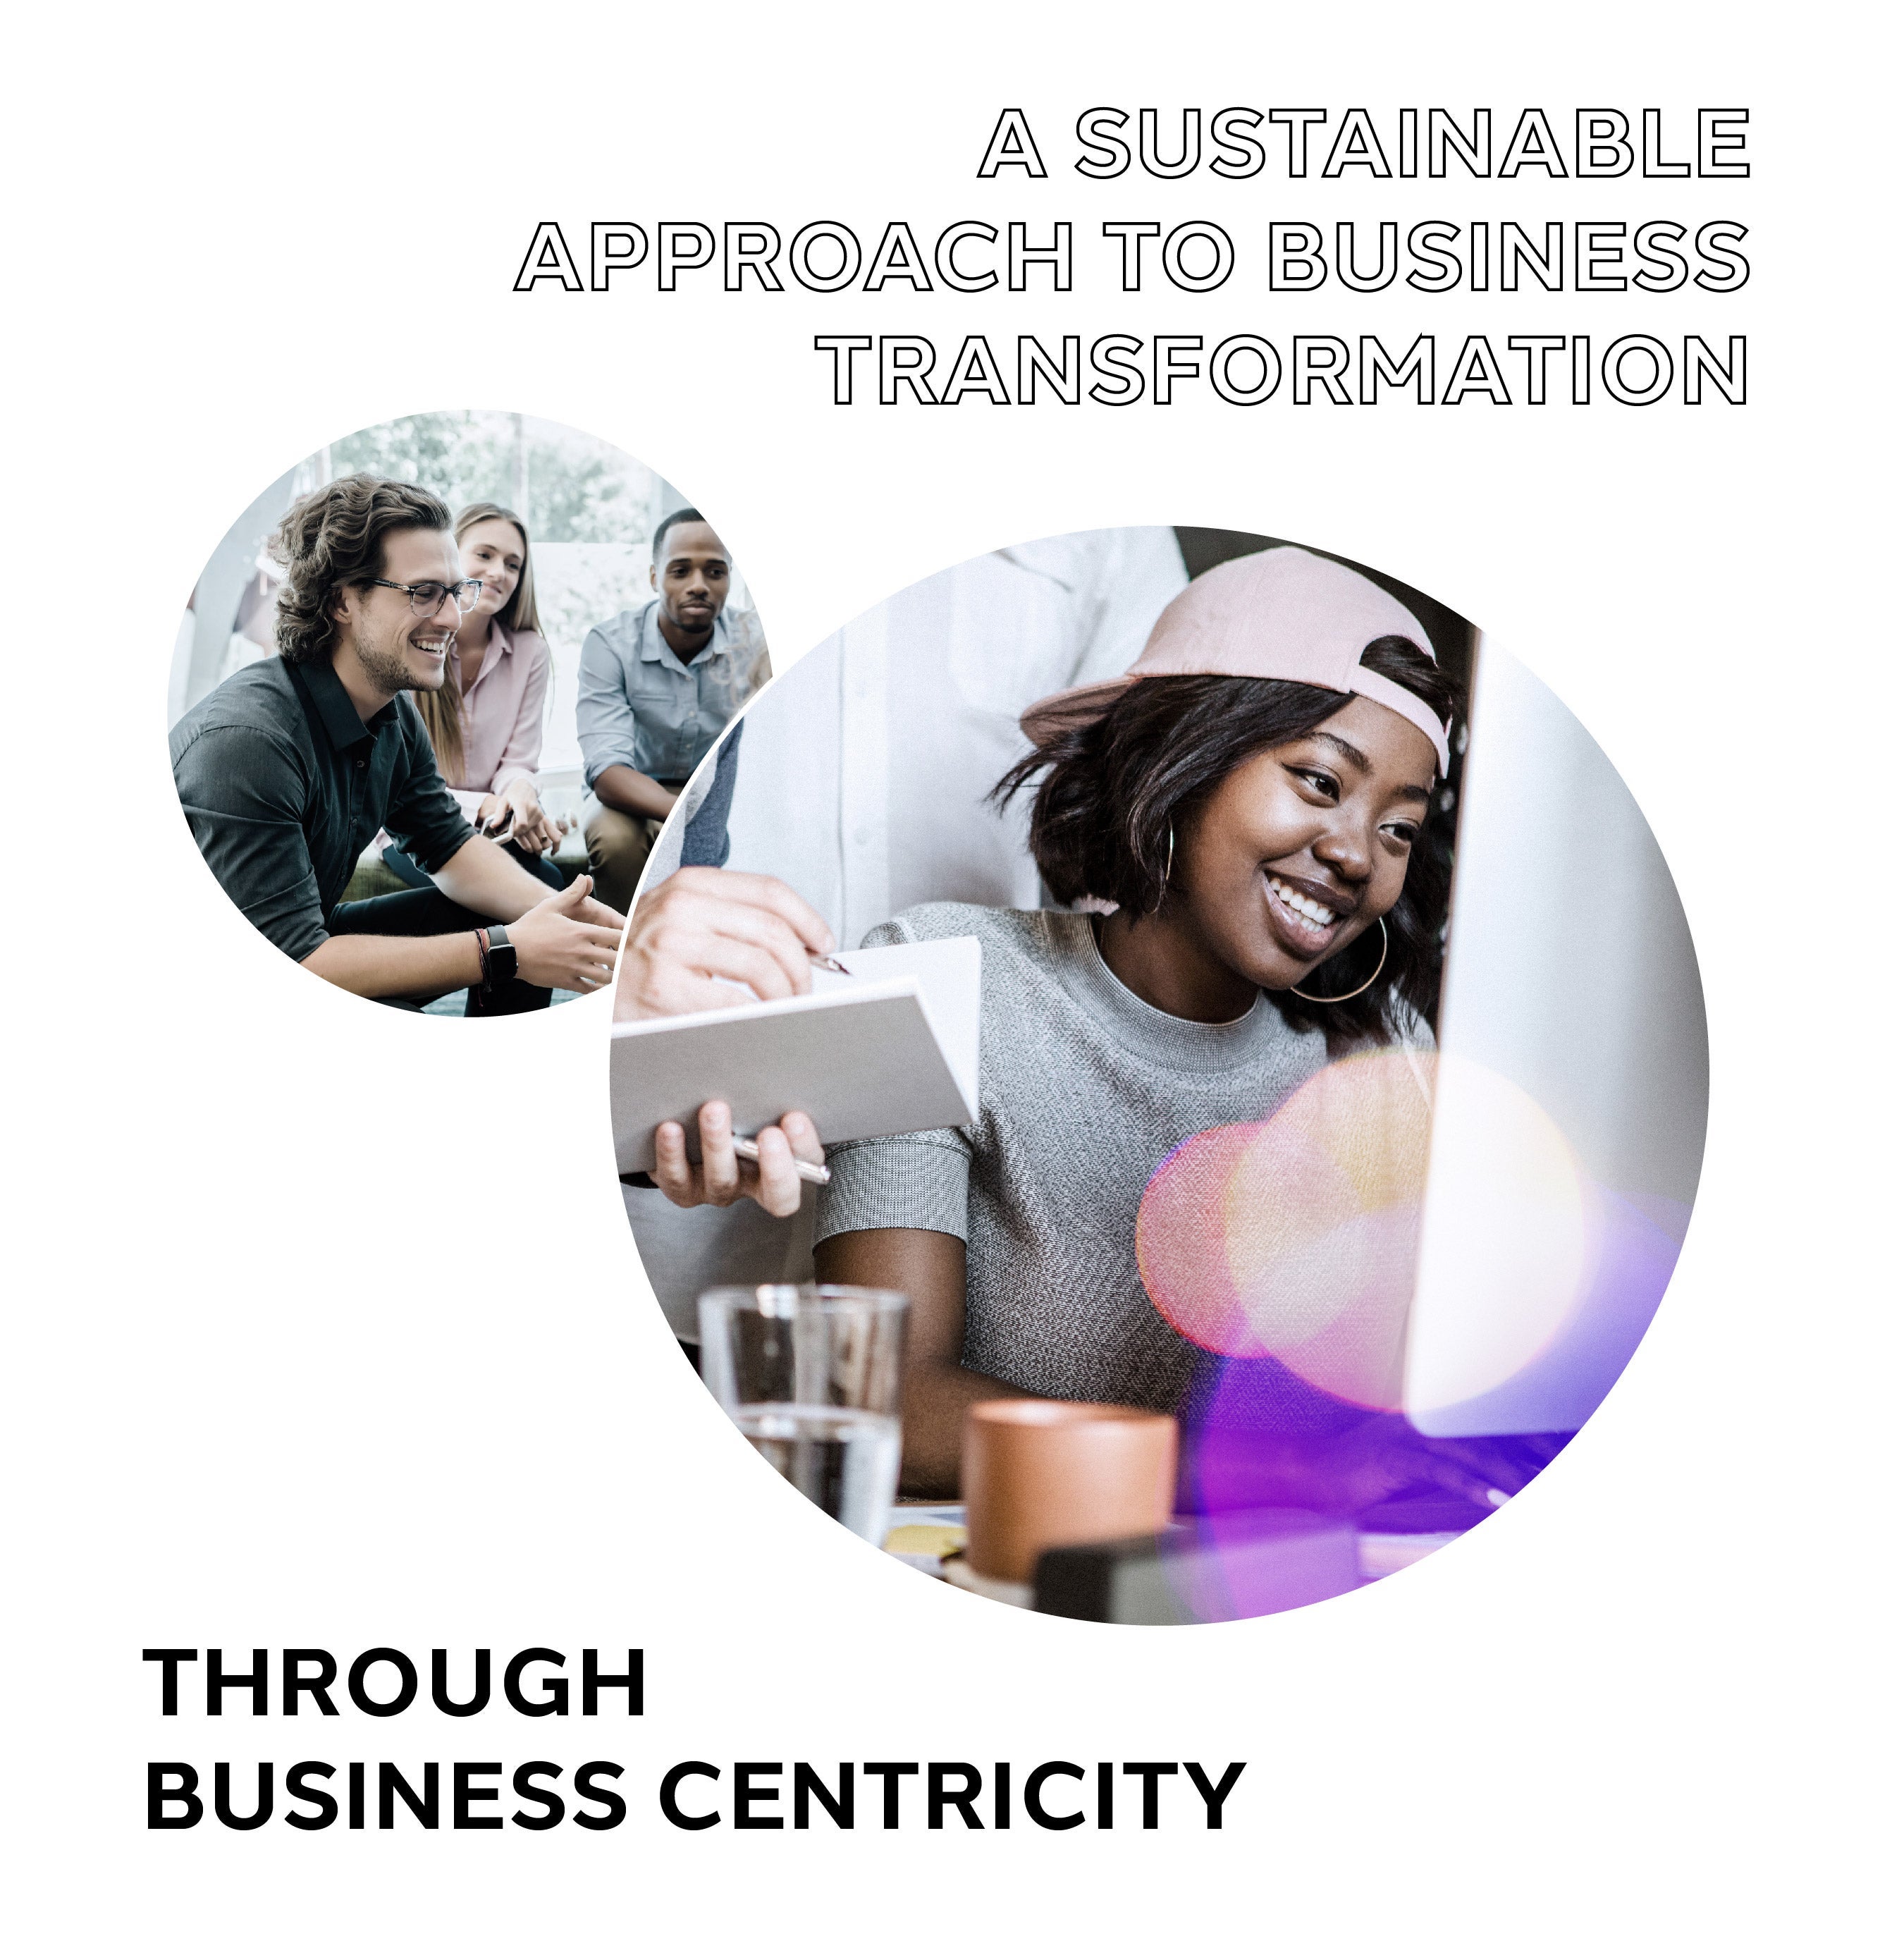 A Sustainable Approach To Business Transformation